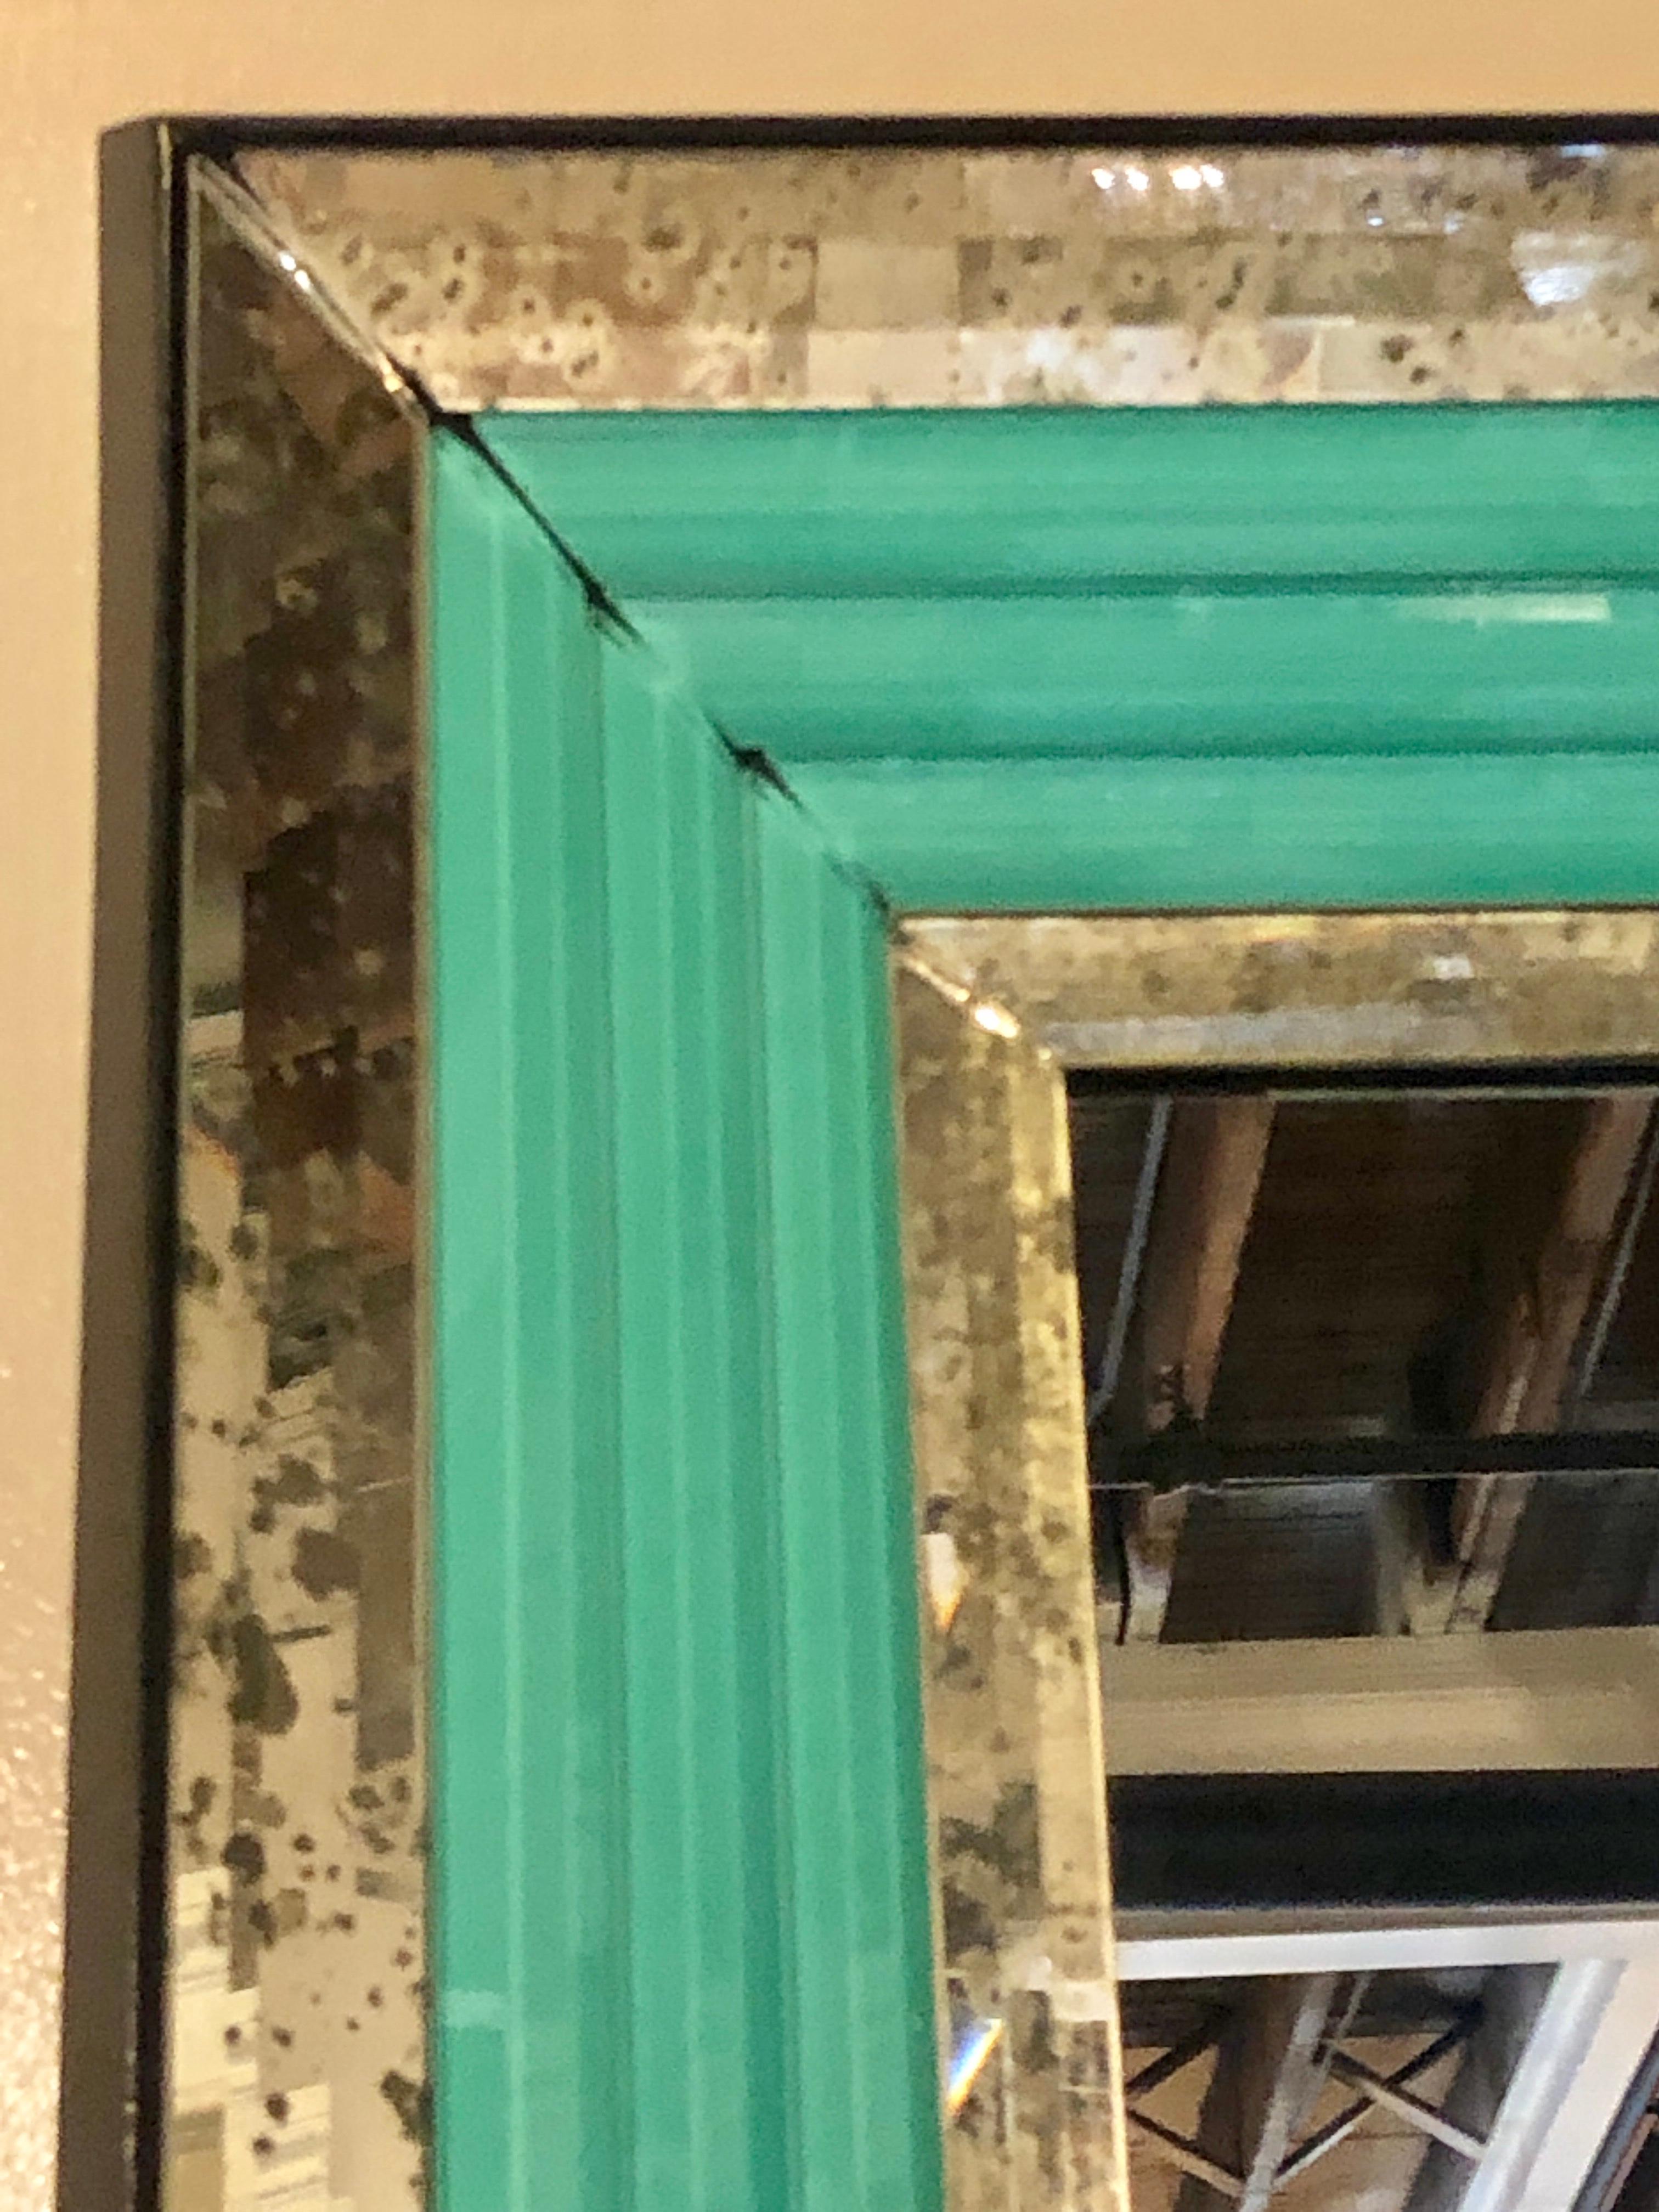 Contemporary Pair of Art Deco Wall, Console or Pier Mirrors with Turquoise Beveled Frames